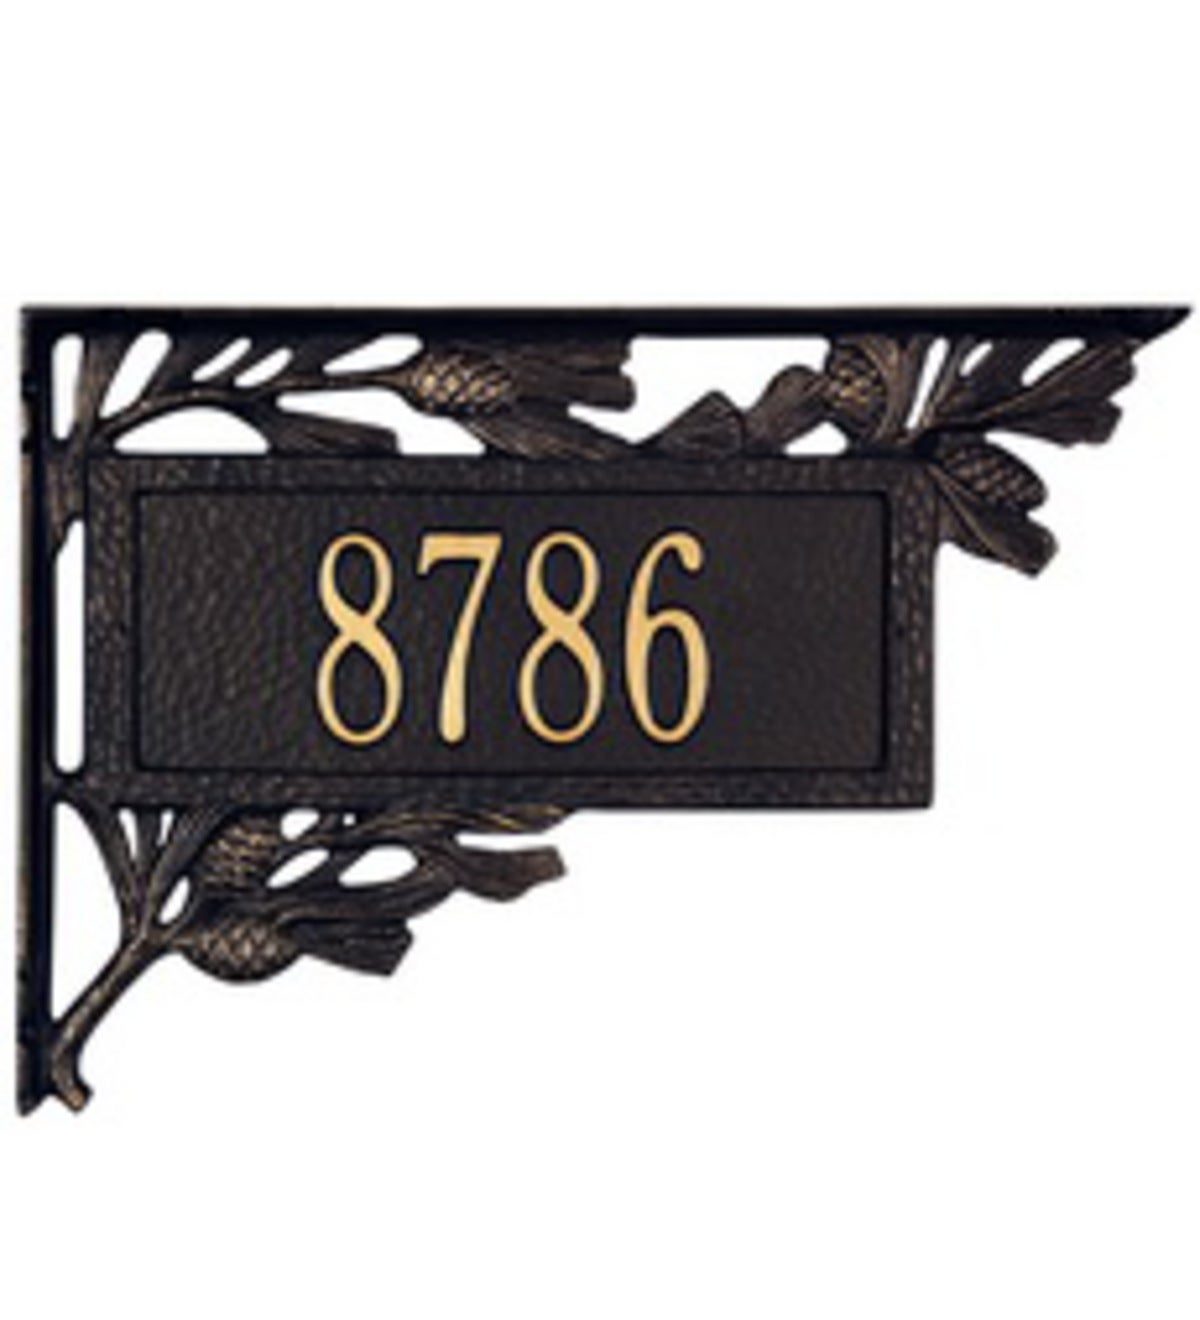 American-Made Personalized Pine Cone 2-Sided Mailbox Address Marker In Cast Aluminum - Black